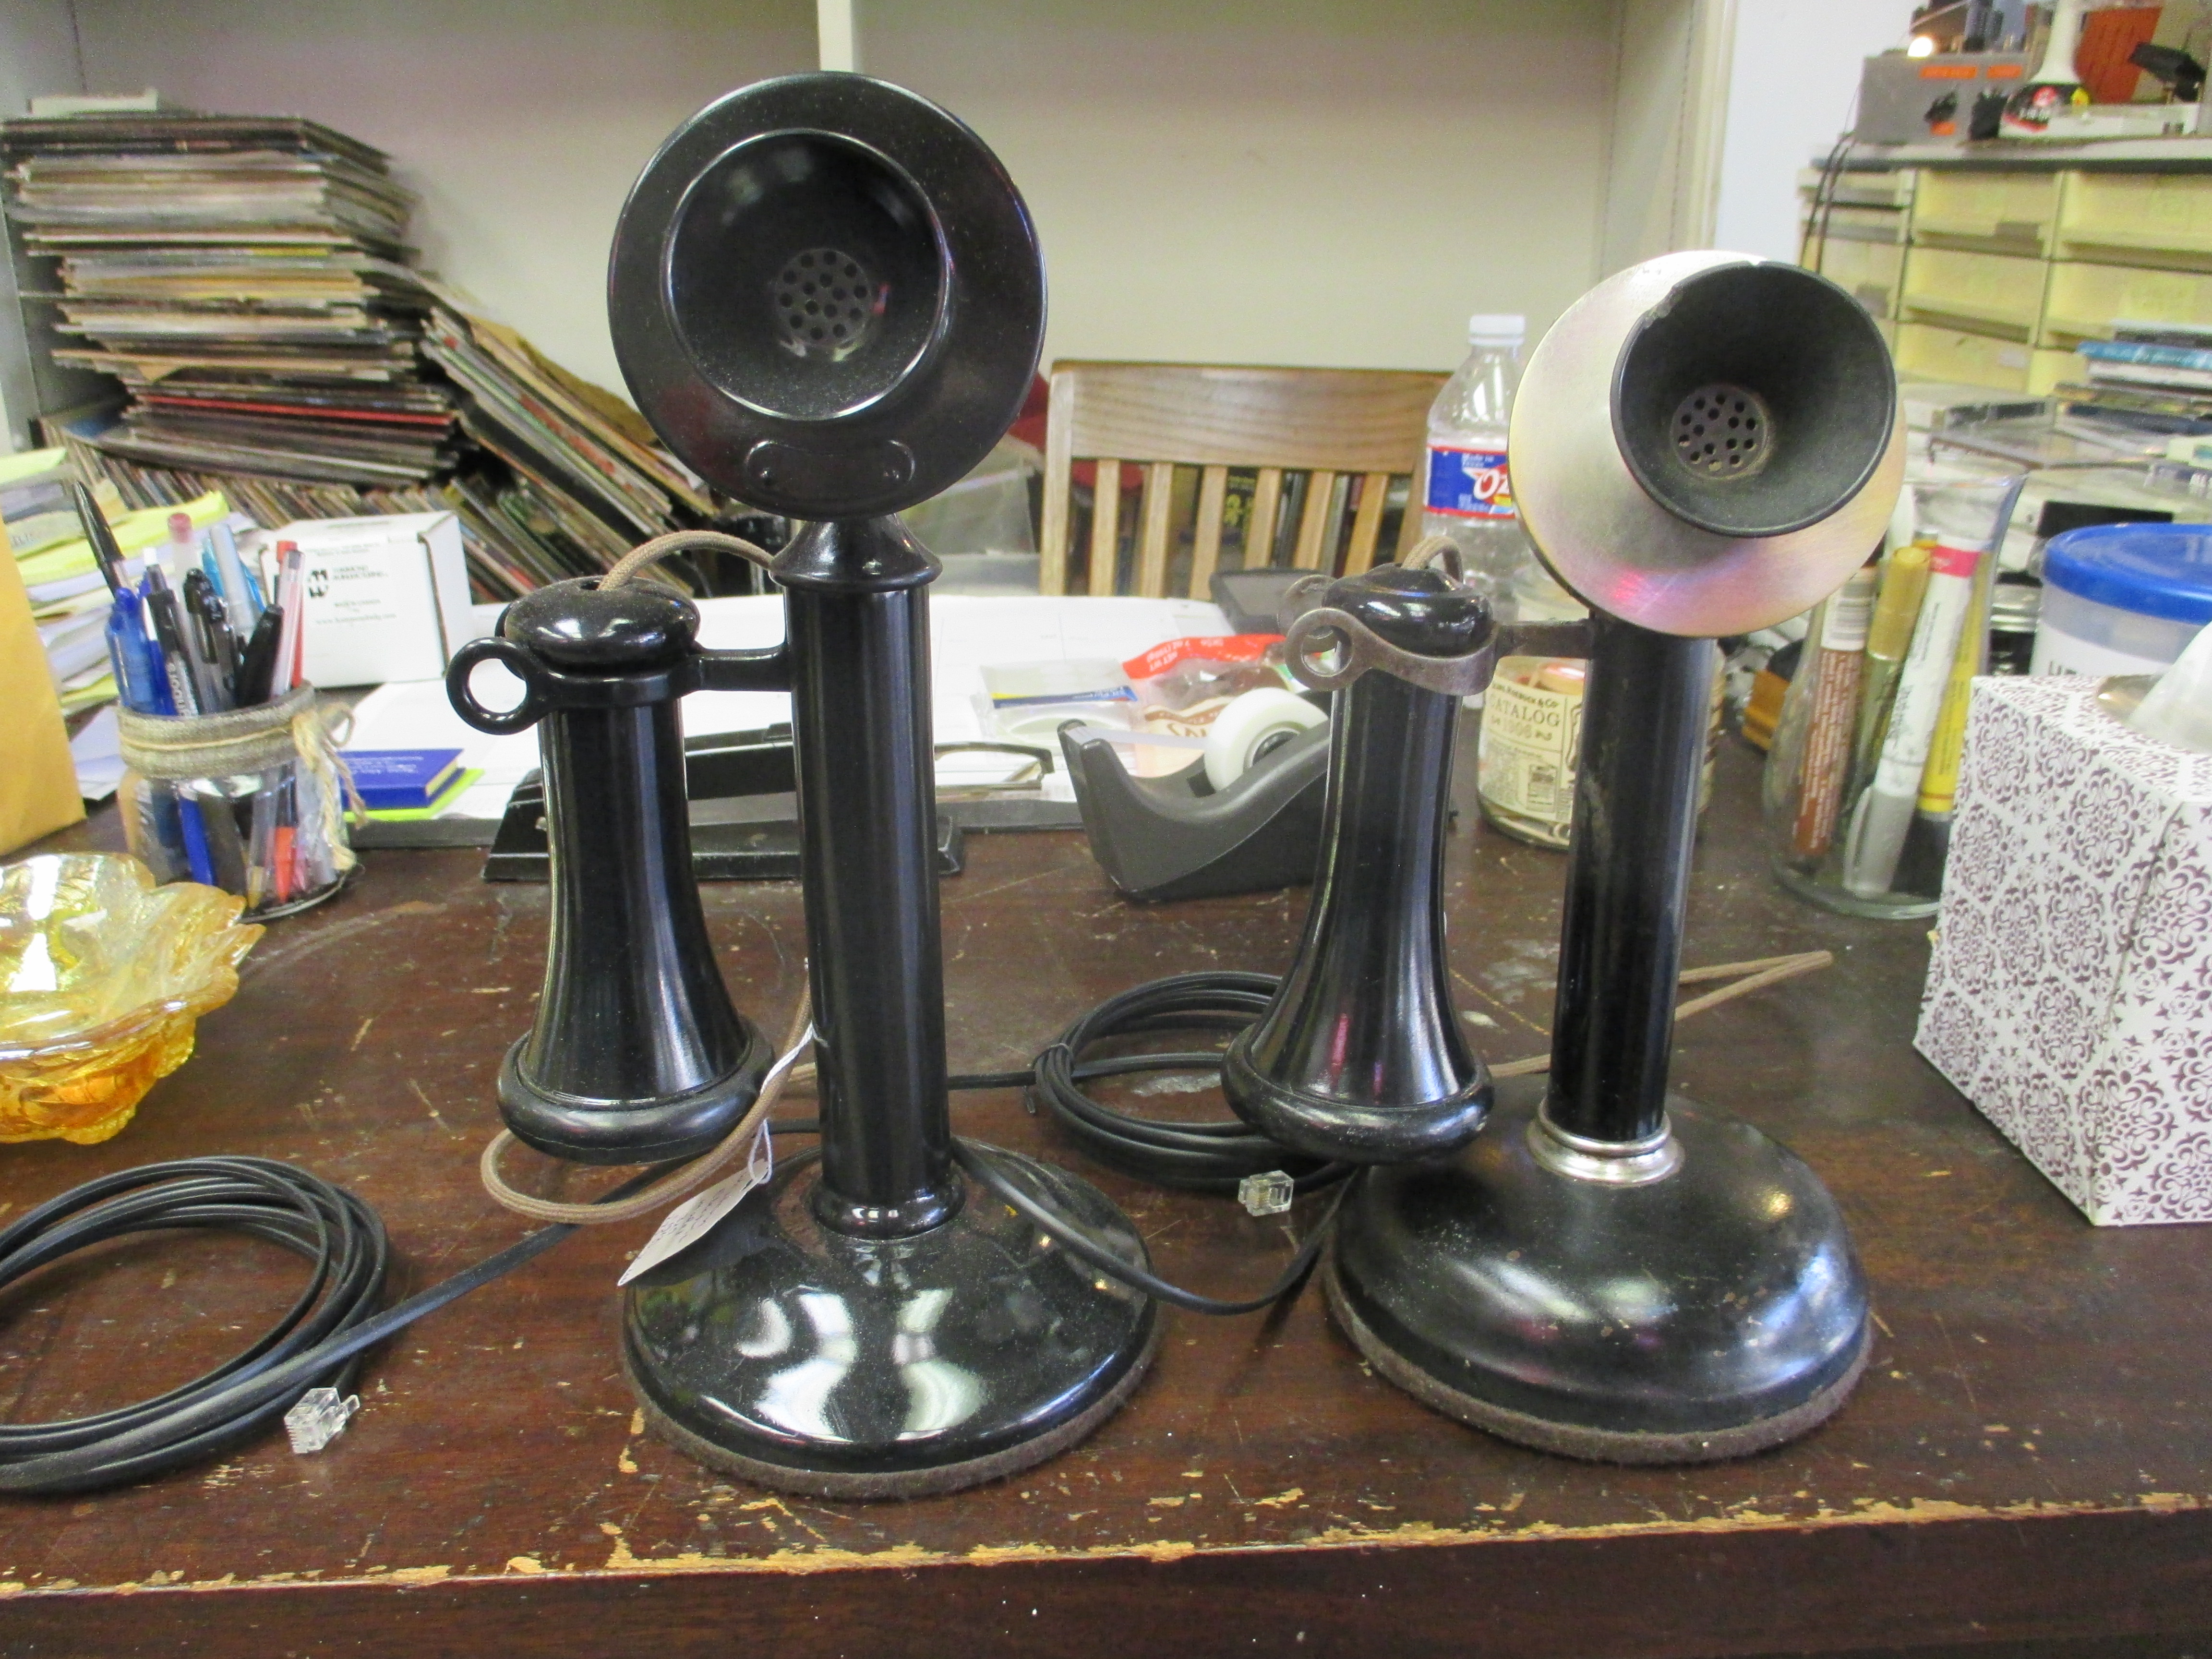 Candlestick Phones non-dial type. Left, Western Electric Model 329 $275. Right, Stromberg Carlson c 1910 $335